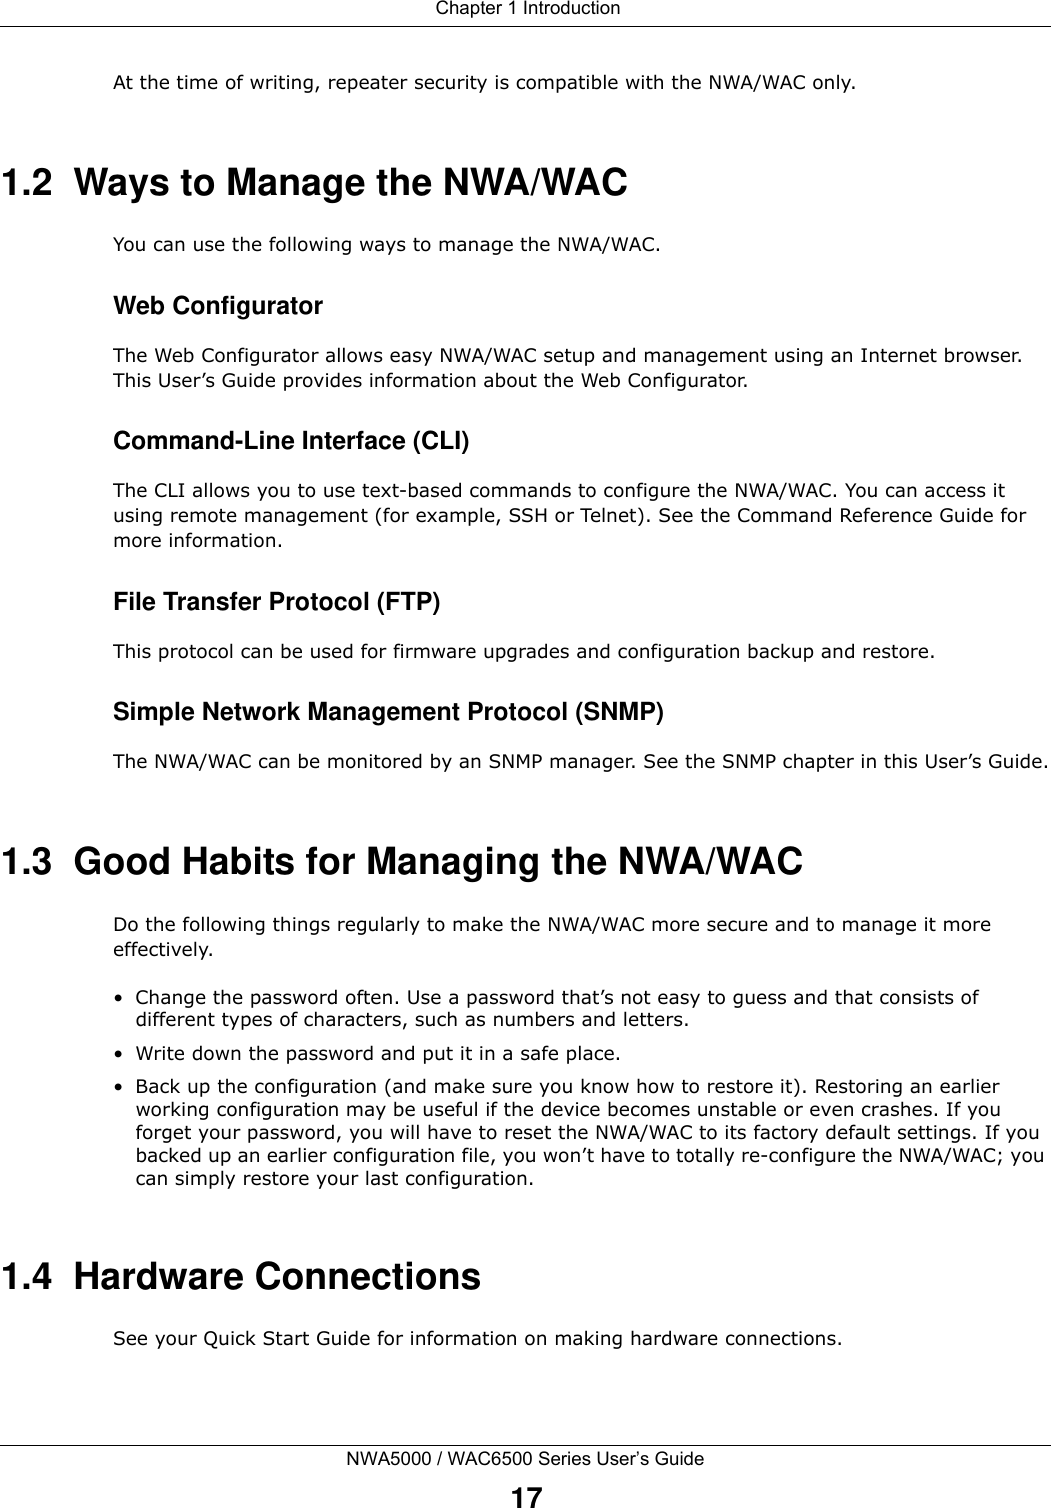  Chapter 1 IntroductionNWA5000 / WAC6500 Series User’s Guide17At the time of writing, repeater security is compatible with the NWA/WAC only. 1.2  Ways to Manage the NWA/WACYou can use the following ways to manage the NWA/WAC.Web ConfiguratorThe Web Configurator allows easy NWA/WAC setup and management using an Internet browser. This User’s Guide provides information about the Web Configurator.Command-Line Interface (CLI)The CLI allows you to use text-based commands to configure the NWA/WAC. You can access it using remote management (for example, SSH or Telnet). See the Command Reference Guide for more information.File Transfer Protocol (FTP)This protocol can be used for firmware upgrades and configuration backup and restore.Simple Network Management Protocol (SNMP)The NWA/WAC can be monitored by an SNMP manager. See the SNMP chapter in this User’s Guide.1.3  Good Habits for Managing the NWA/WACDo the following things regularly to make the NWA/WAC more secure and to manage it more effectively.• Change the password often. Use a password that’s not easy to guess and that consists of different types of characters, such as numbers and letters.• Write down the password and put it in a safe place.• Back up the configuration (and make sure you know how to restore it). Restoring an earlier working configuration may be useful if the device becomes unstable or even crashes. If you forget your password, you will have to reset the NWA/WAC to its factory default settings. If you backed up an earlier configuration file, you won’t have to totally re-configure the NWA/WAC; you can simply restore your last configuration.1.4  Hardware ConnectionsSee your Quick Start Guide for information on making hardware connections.